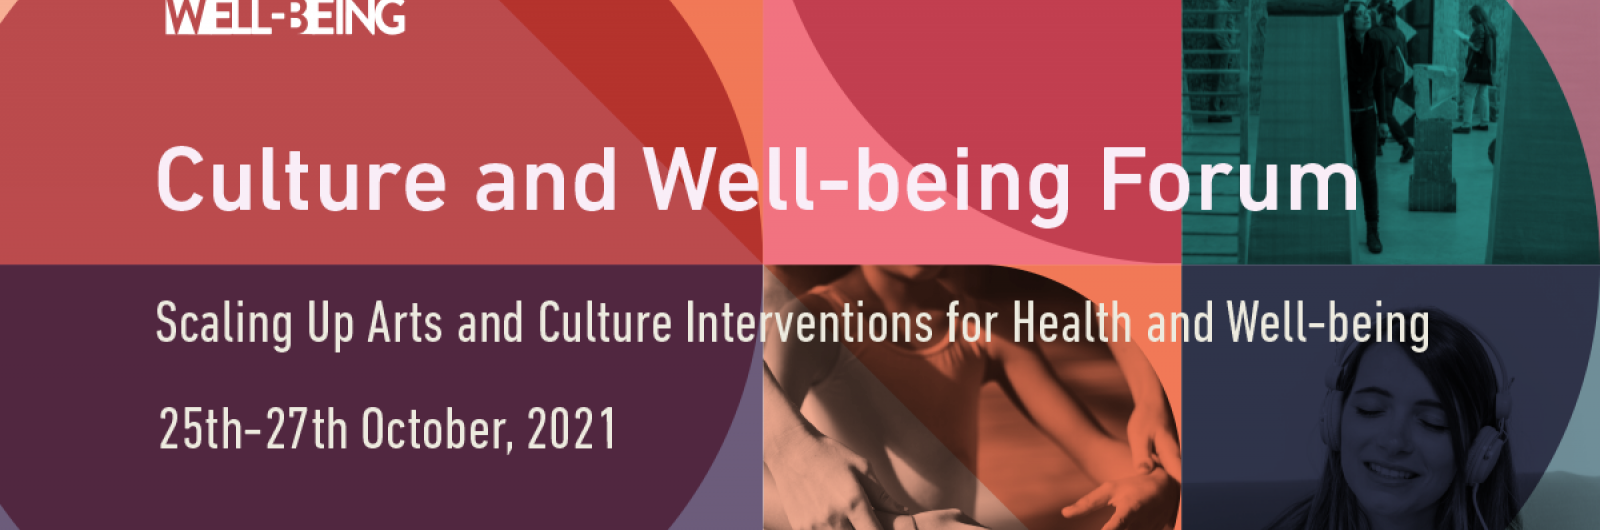 Culture and Well-being Forum